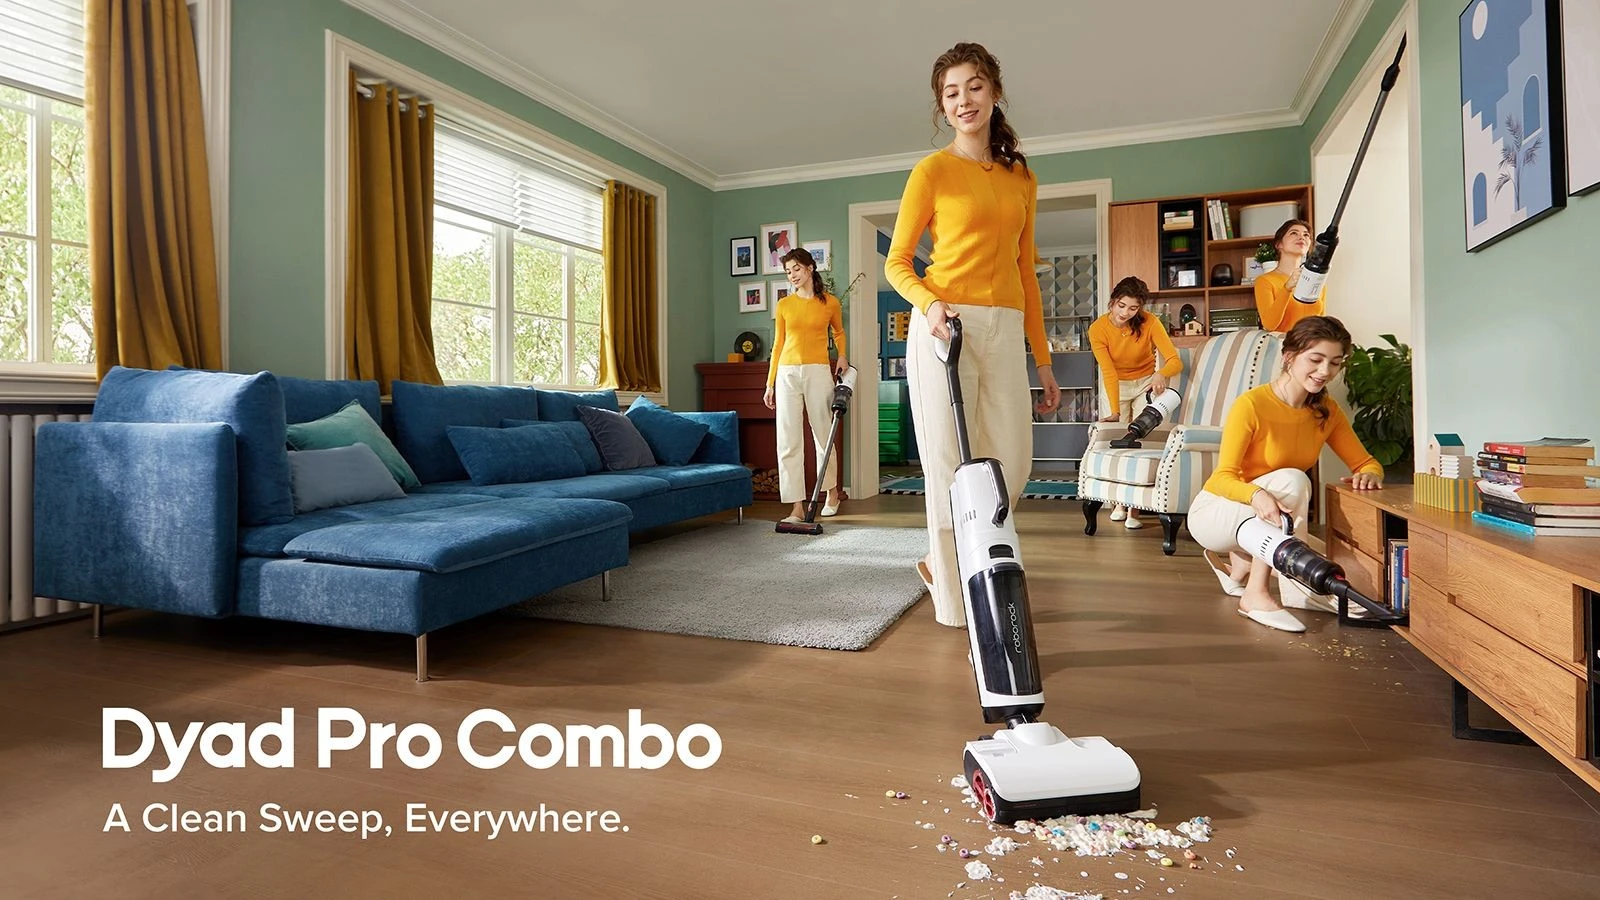 Roborock Dyad Pro Combo 5-in-1 Cordless Wet Dry Vacuum Cleaner 17000Pa Suction Self-Cleaning & Drying Smart Dust Sensor 4000mAh Battery 43Mins Runtime LED Display App & Voice Control for Hard Floor Carpet Bed Sofa Furniture - Black